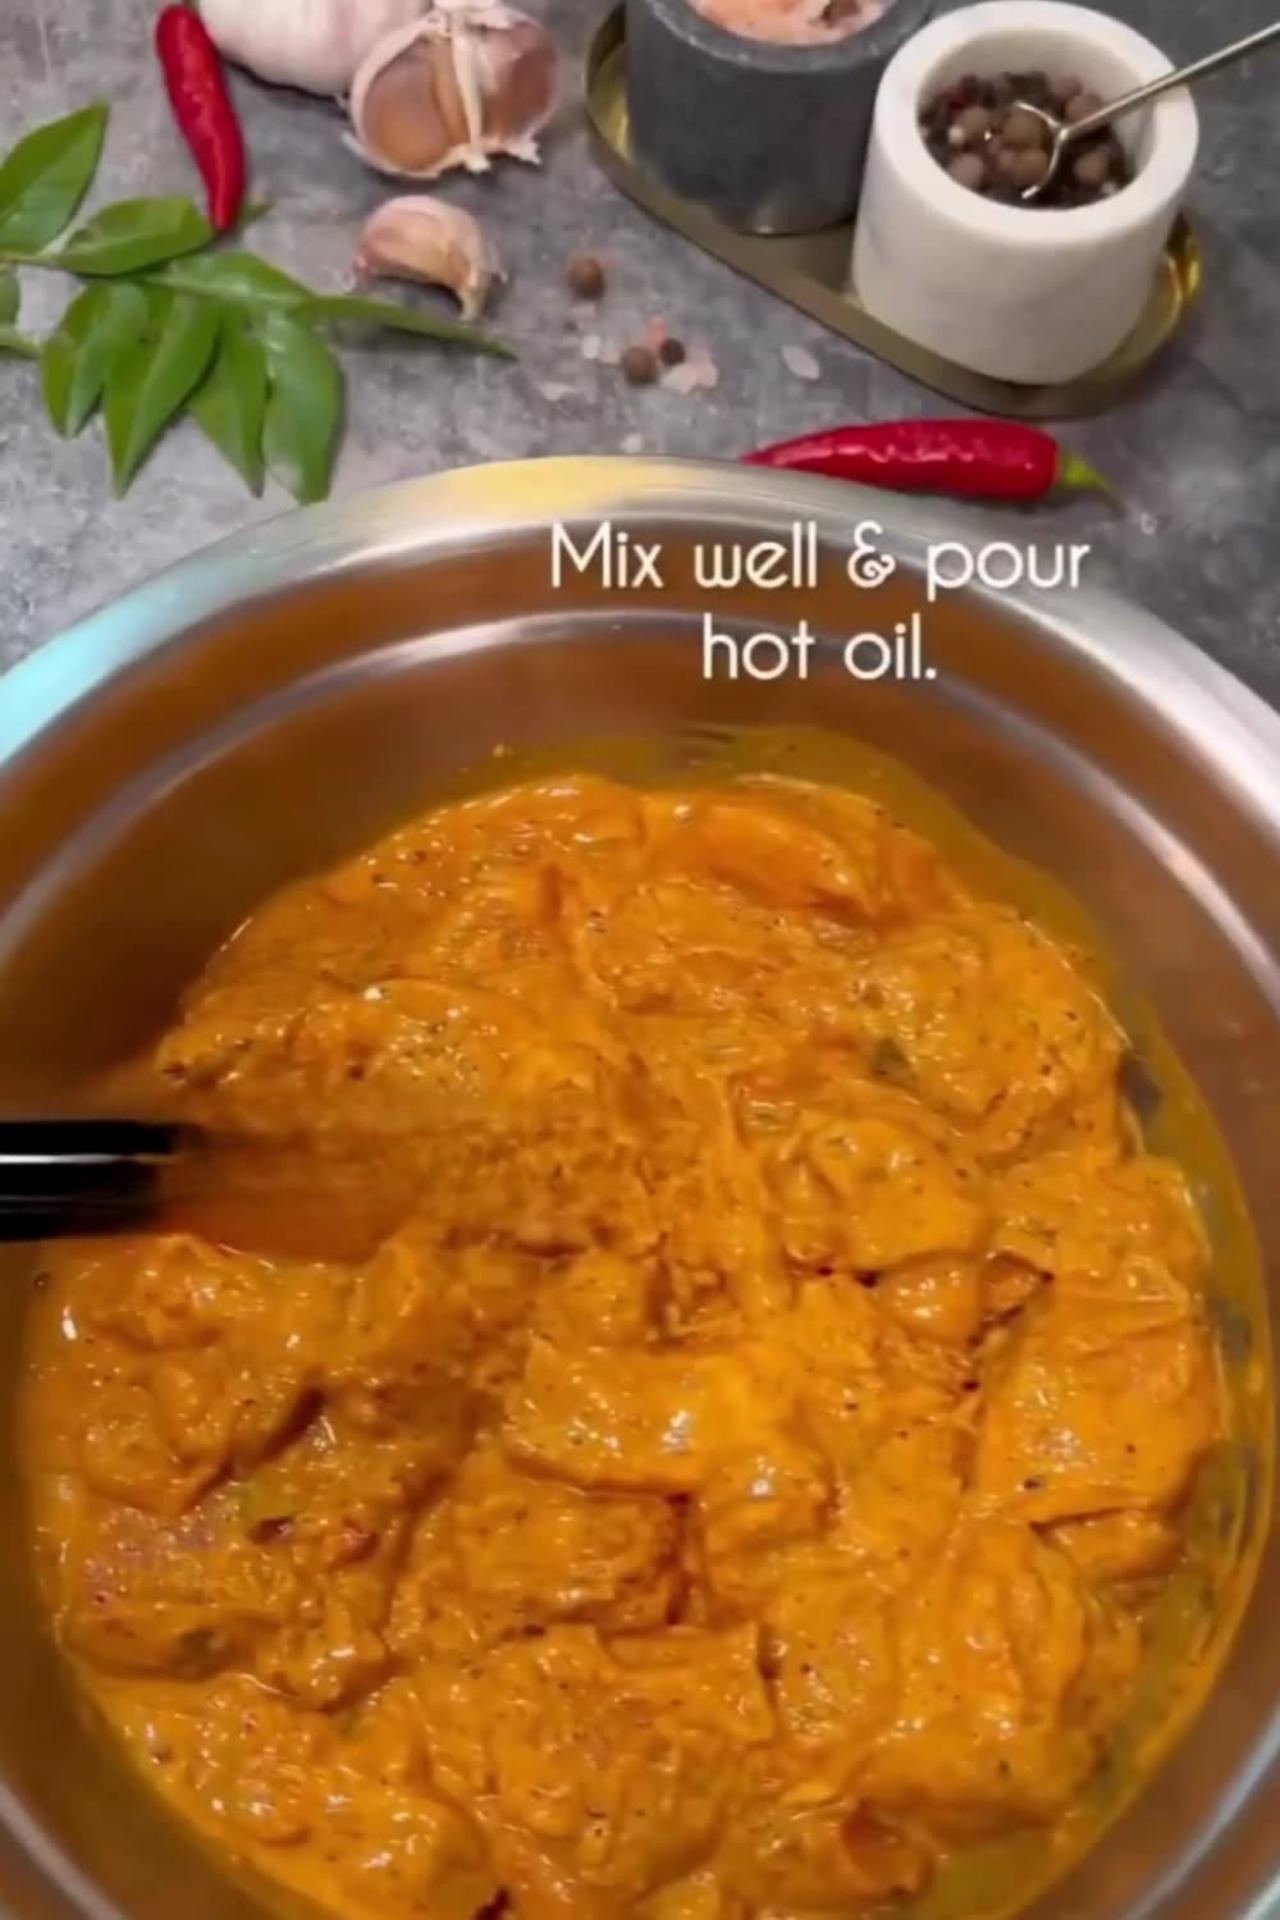 "Spicy Chicken 65 Secret Recipe Revealed! 🔥🍗 Better Than Takeout! #IndianFoodMagic"